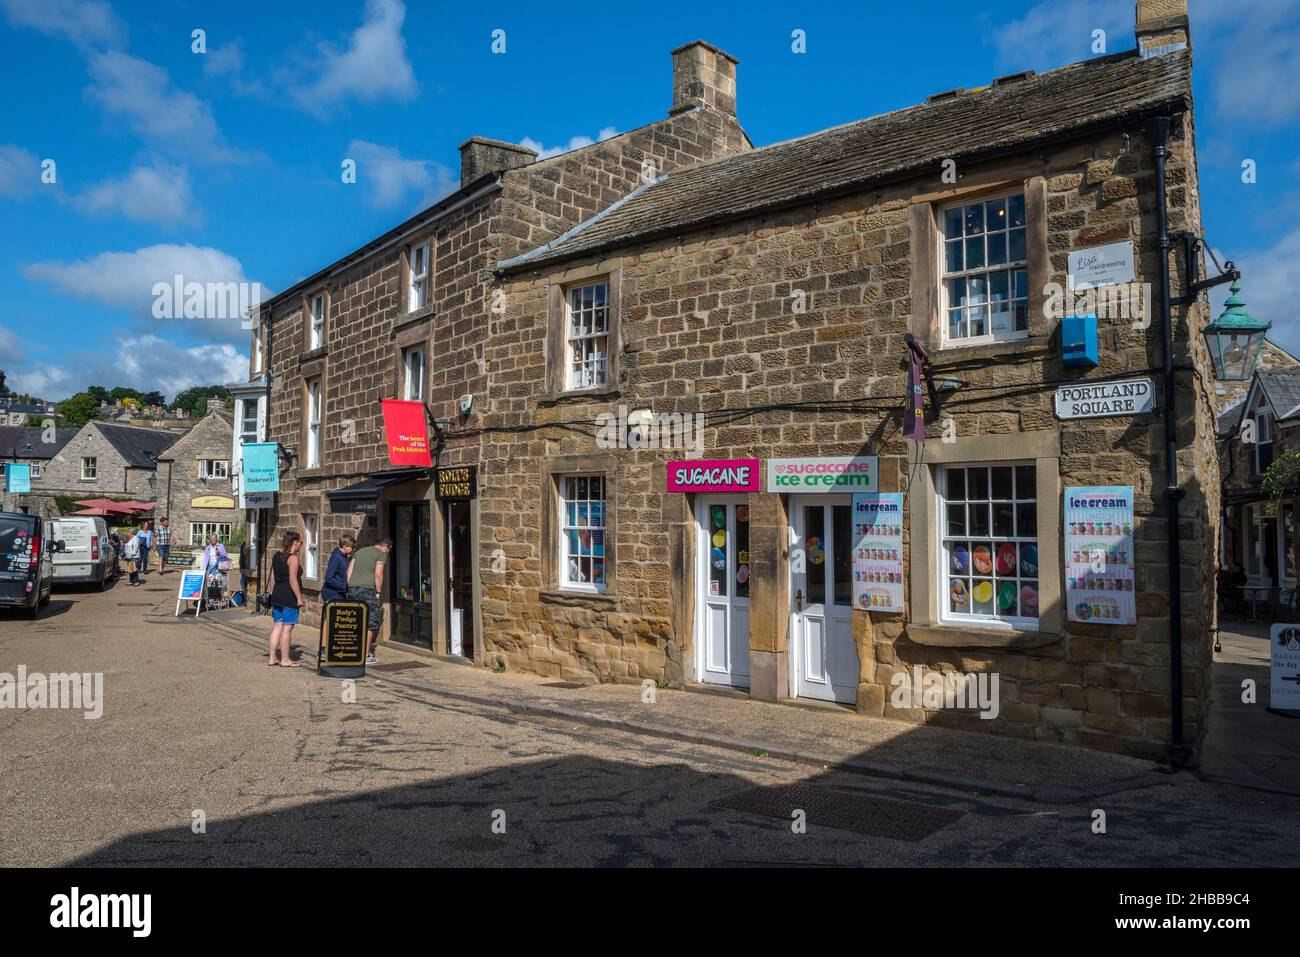 Portland Square, Bakewell, Derbyshire Stock Photo